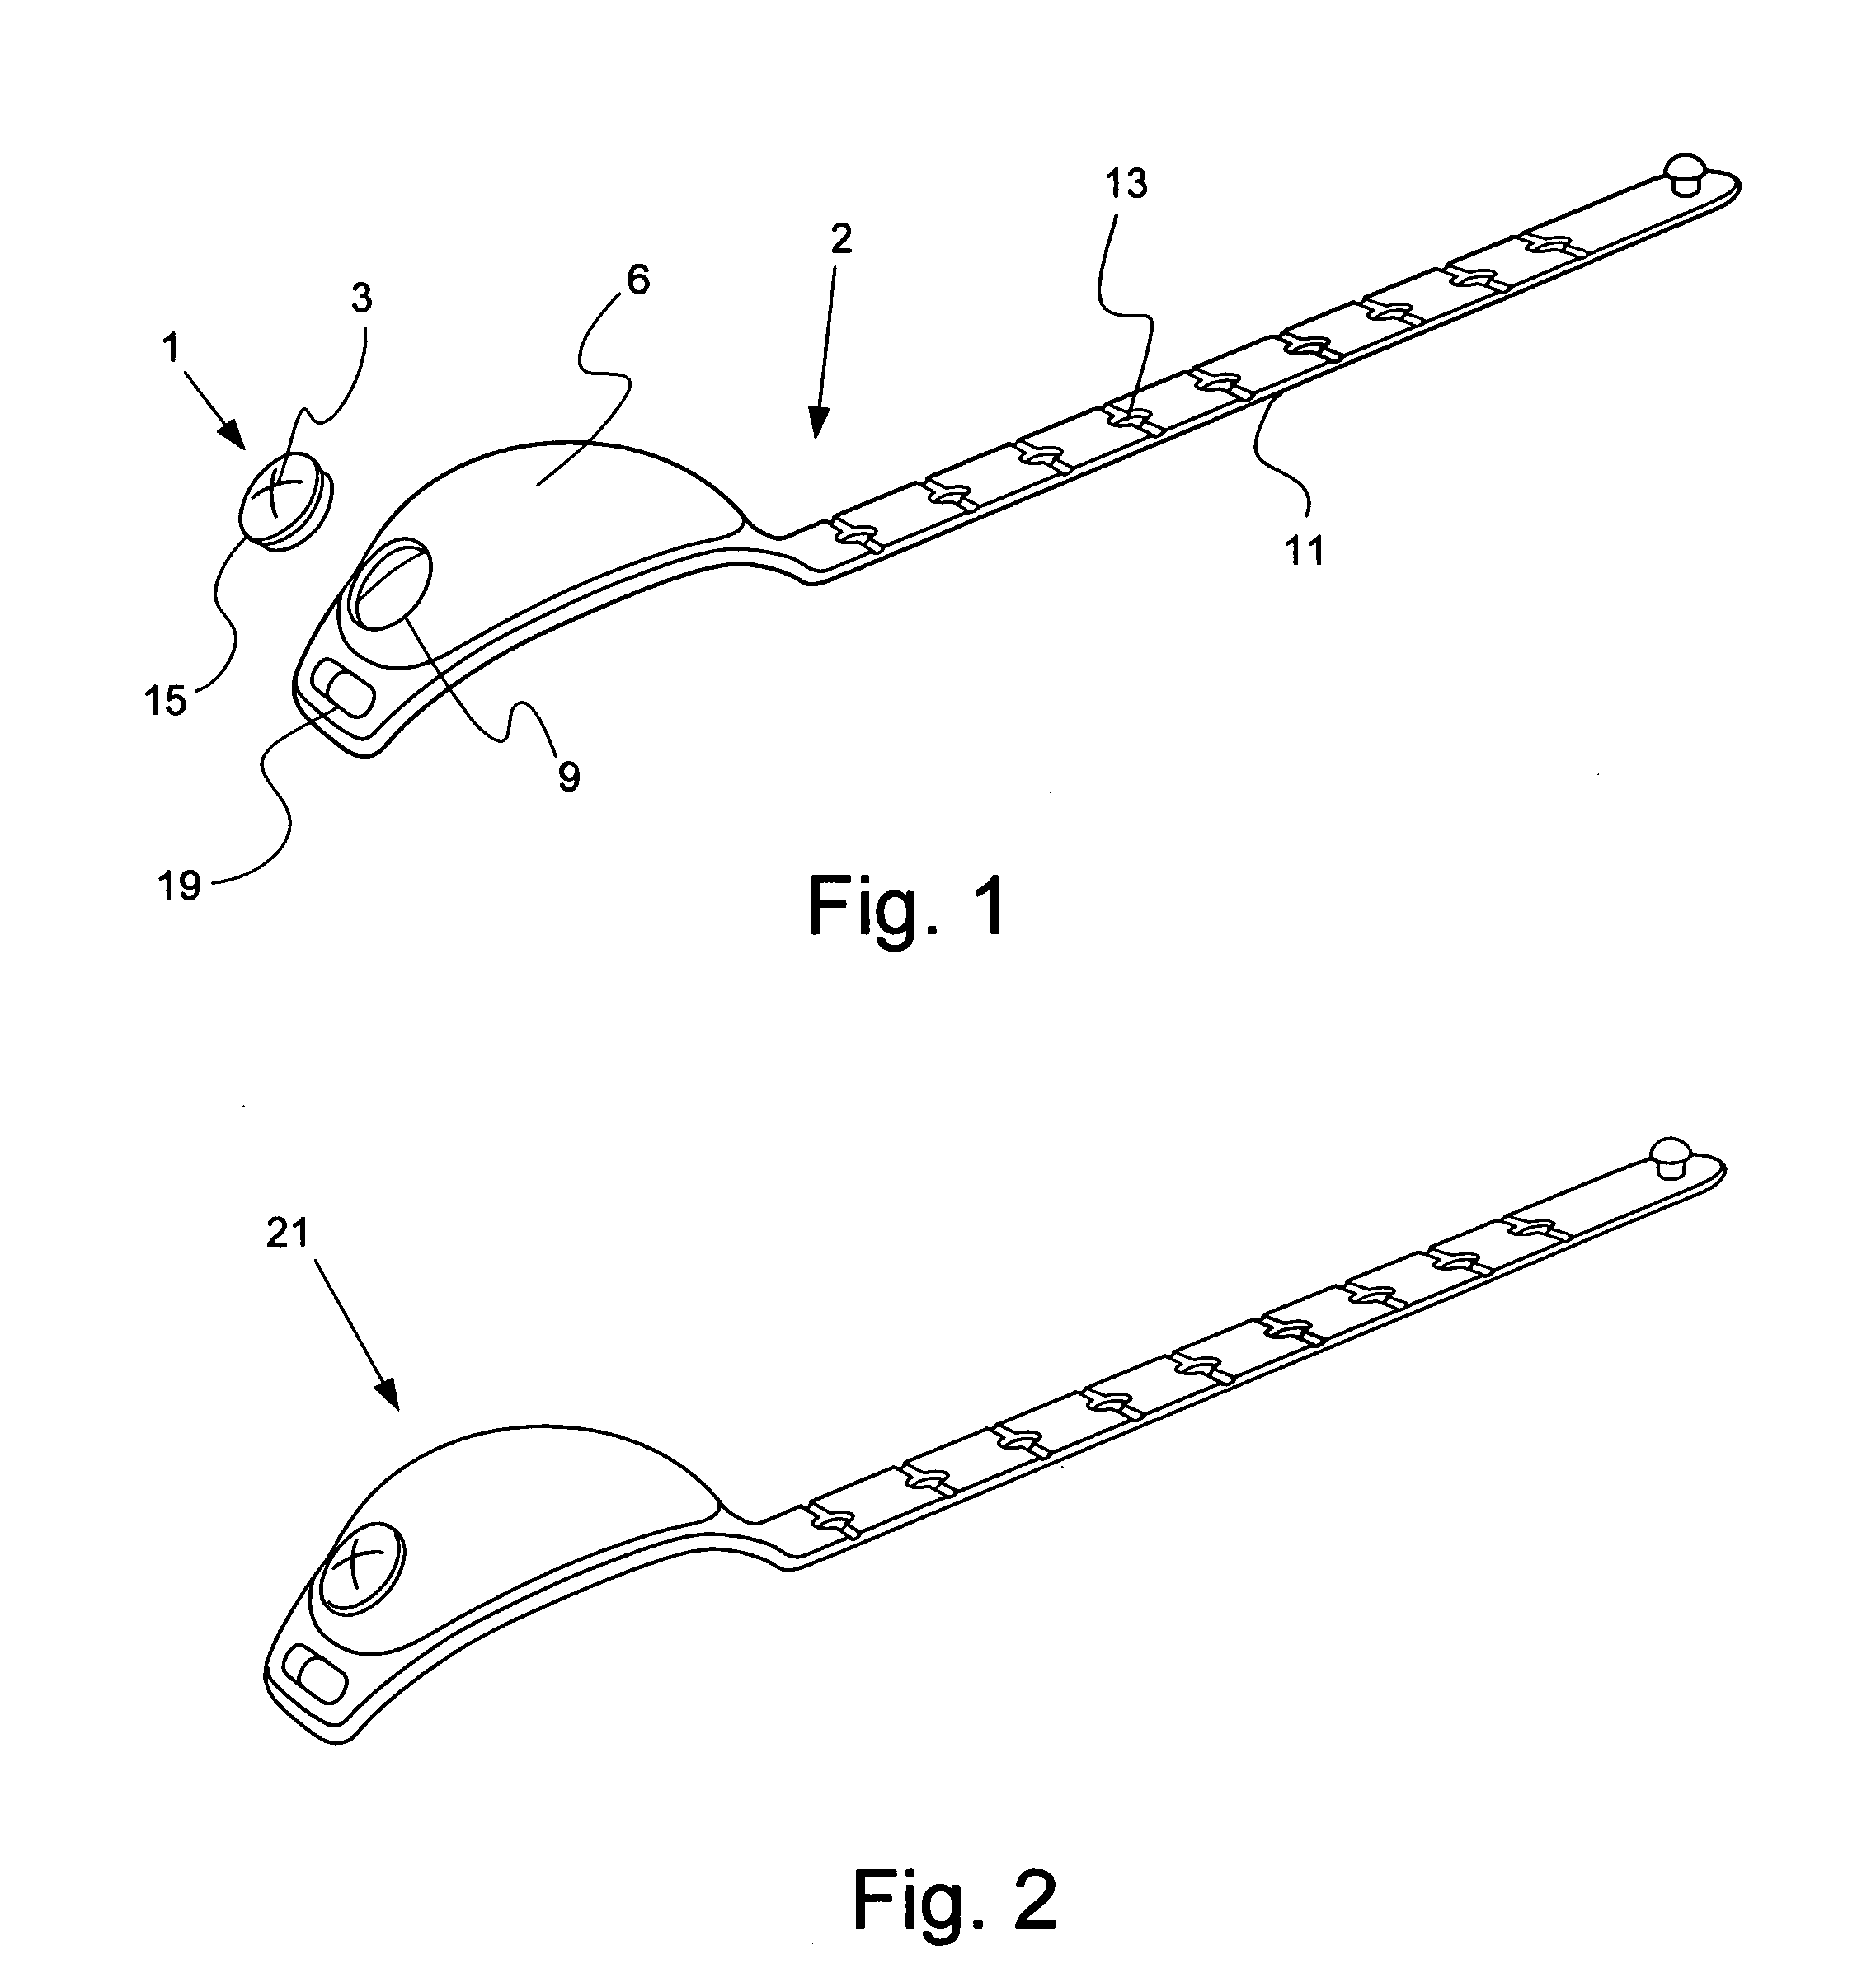 Skin treatment dispenser and method of manufacture